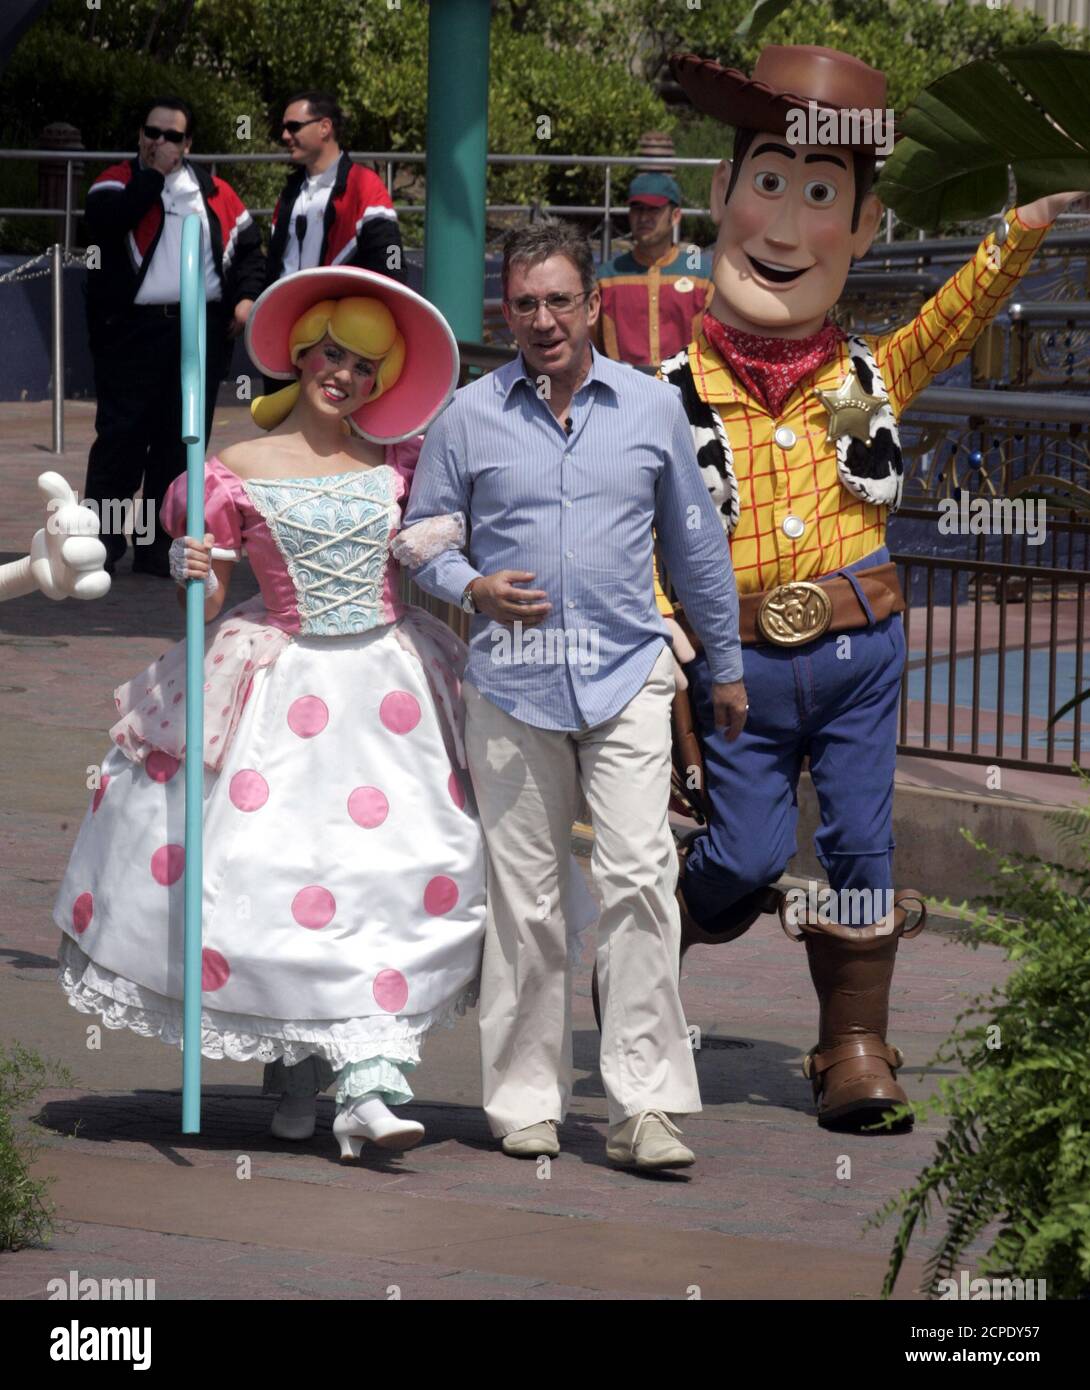 Actor Tim Allen (C) is escorted by by Disney and Pixar characters from the film "Toy Story" Little Bo Peep and Woody (R) as they take part in the official opening of the new attraction "Buzz Lightyear Astro Blasters" in Tomorrowland at the Disneyland theme park as the celebration of Disneyland's 50th anniversary "The Happiest Homecoming on Earth" begins in Anaheim, California, May 4, 2005. Allen was the voice talent for Buzz Lightyear in the film. Walt Disney, founder of the Walt Disney Company and visionary behind the creation of Disneyland, opened the park on July 17, 1955. REUTERS/Fred Prou Banque D'Images